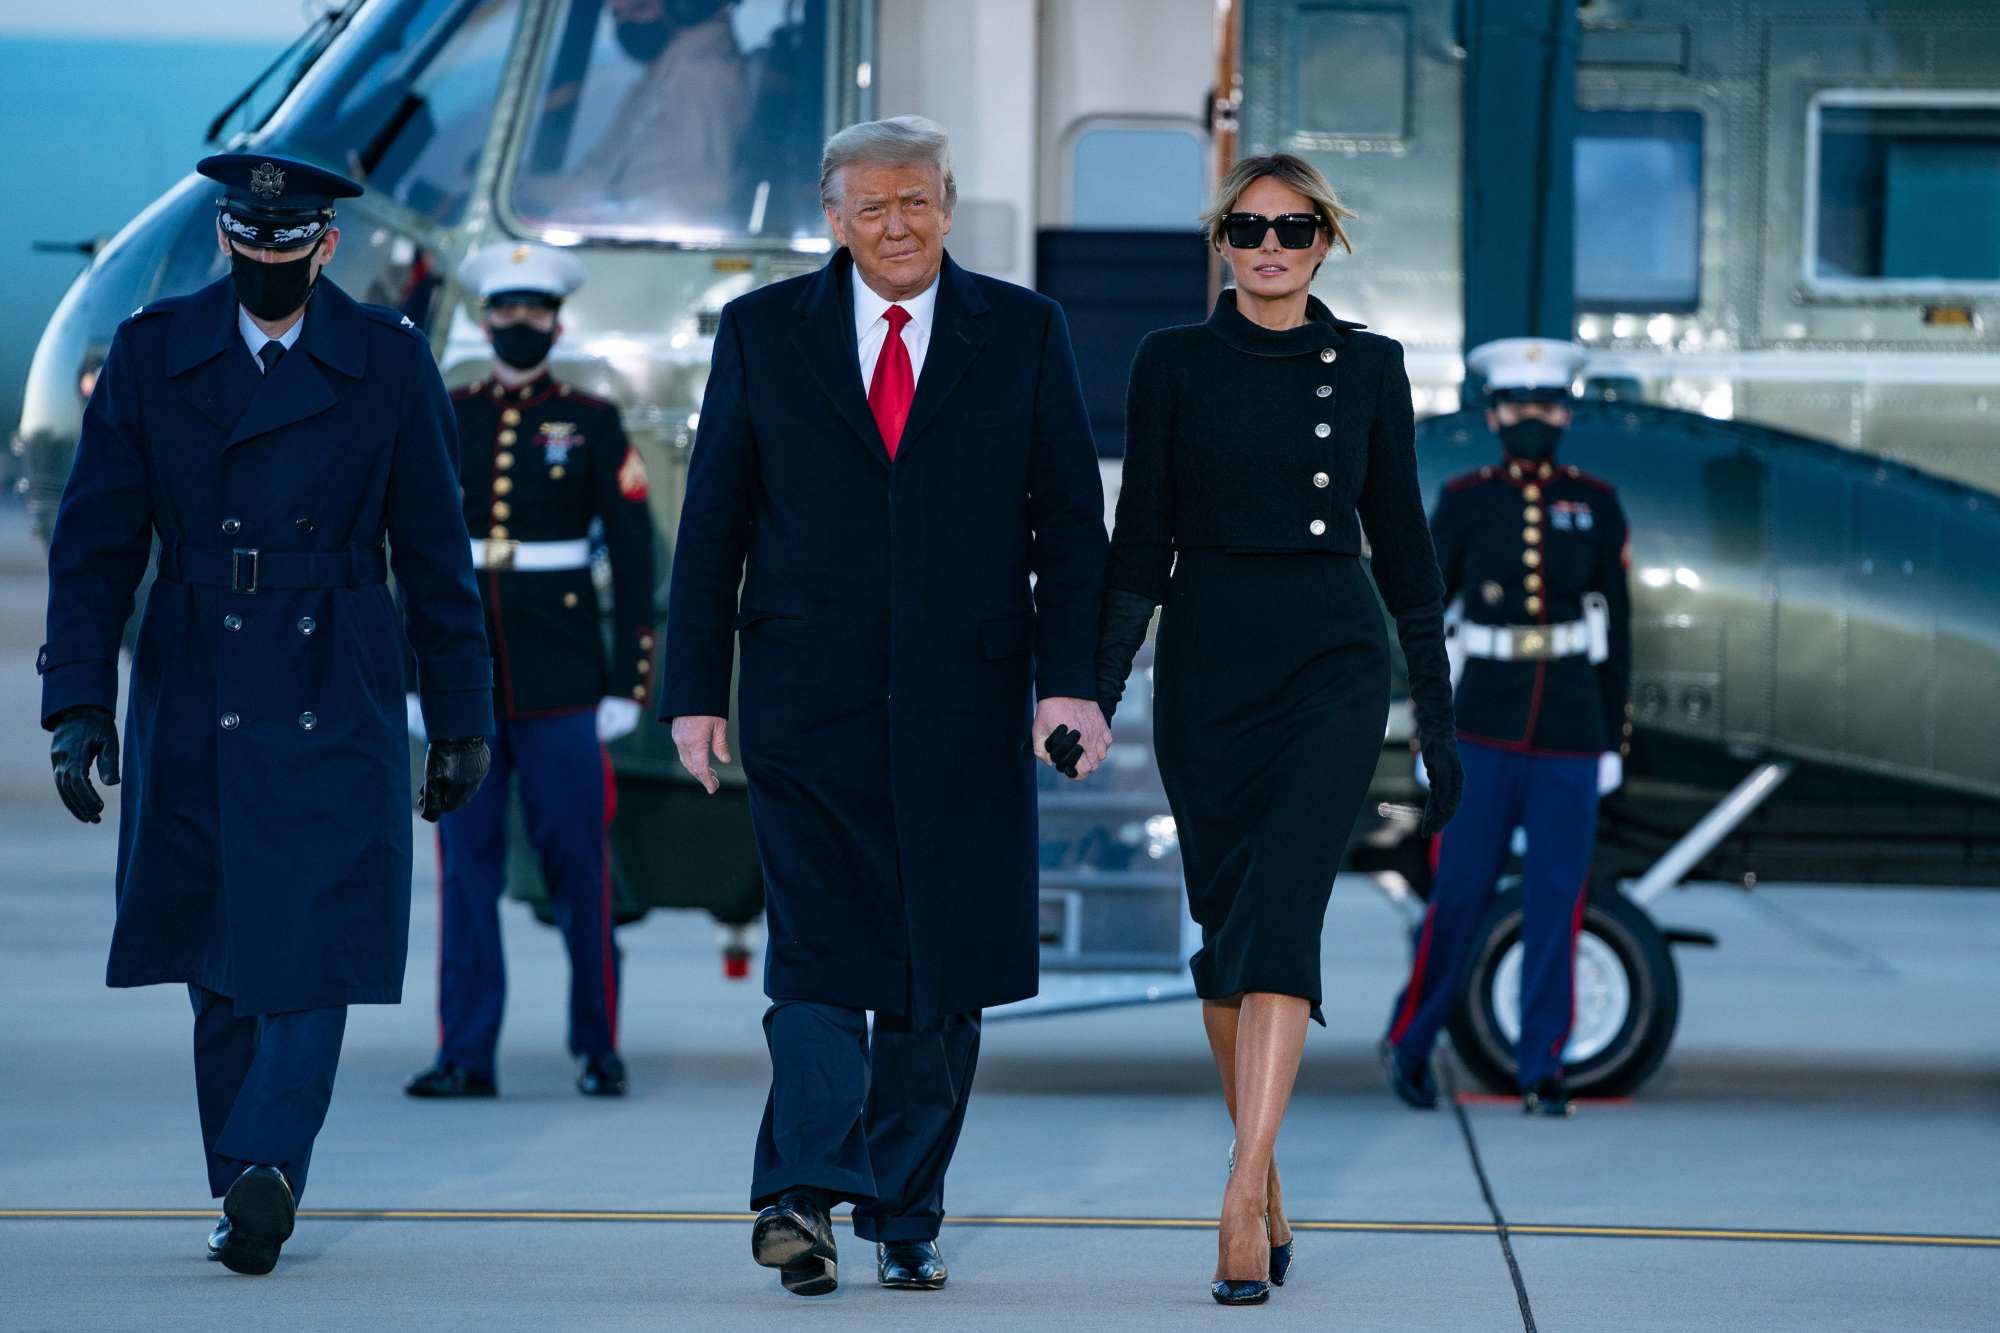 Former US President Donald Trump and former First Lady Melania Trump in Maryland, in January 2021. Photo: AFP